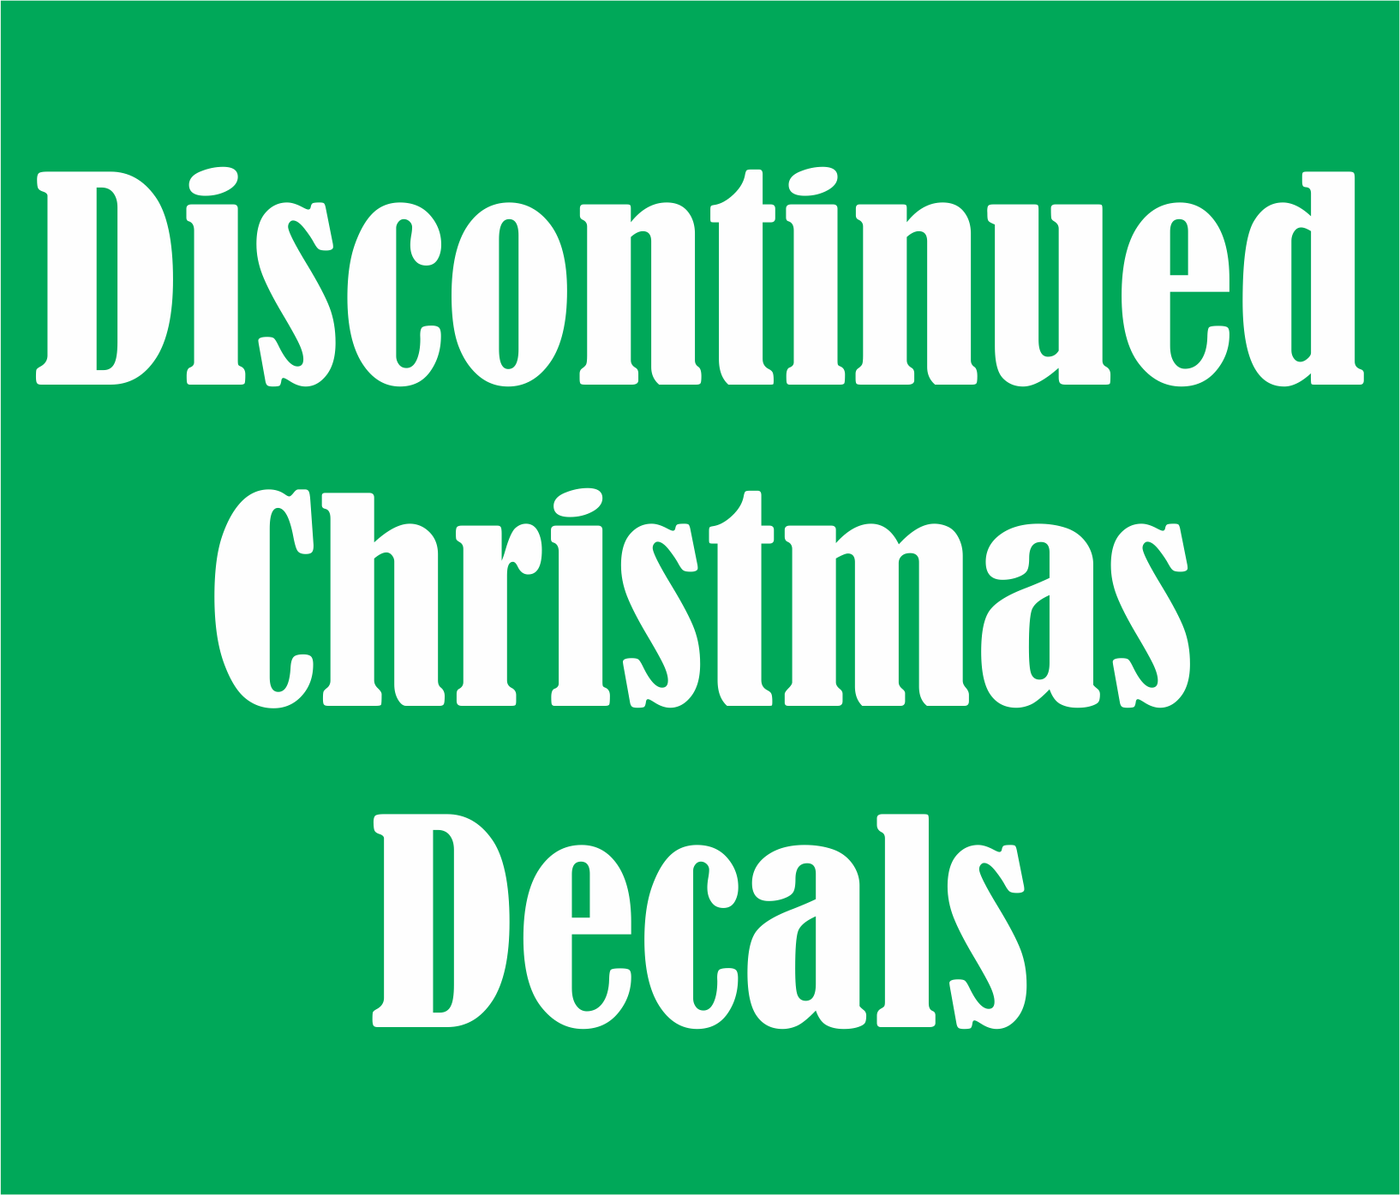 DISCONTINUED Christmas DECALS - Clear Cast Decal